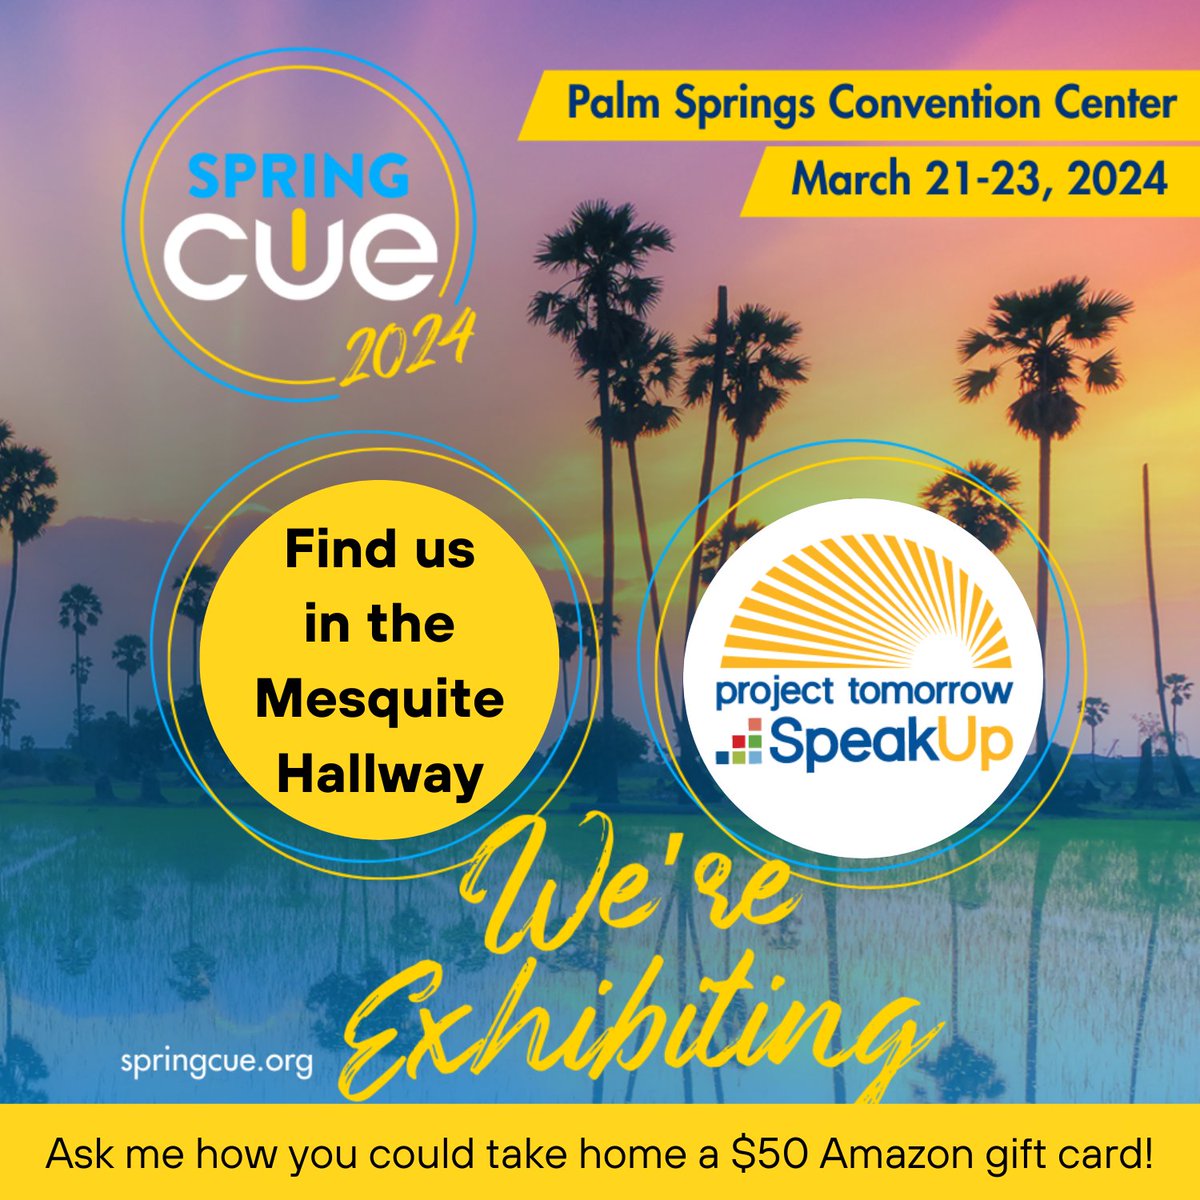 📌Don't miss out on the opportunity to connect with #SpeakUpEd Project Director, Michelle Green @mrg_3 at #SpringCUE! Learn more about how you can walk away with a $50 gift card by sharing your insights on #AI in K-12 education 🖥️🧑‍🏫 tomorrow.org/speakup101/